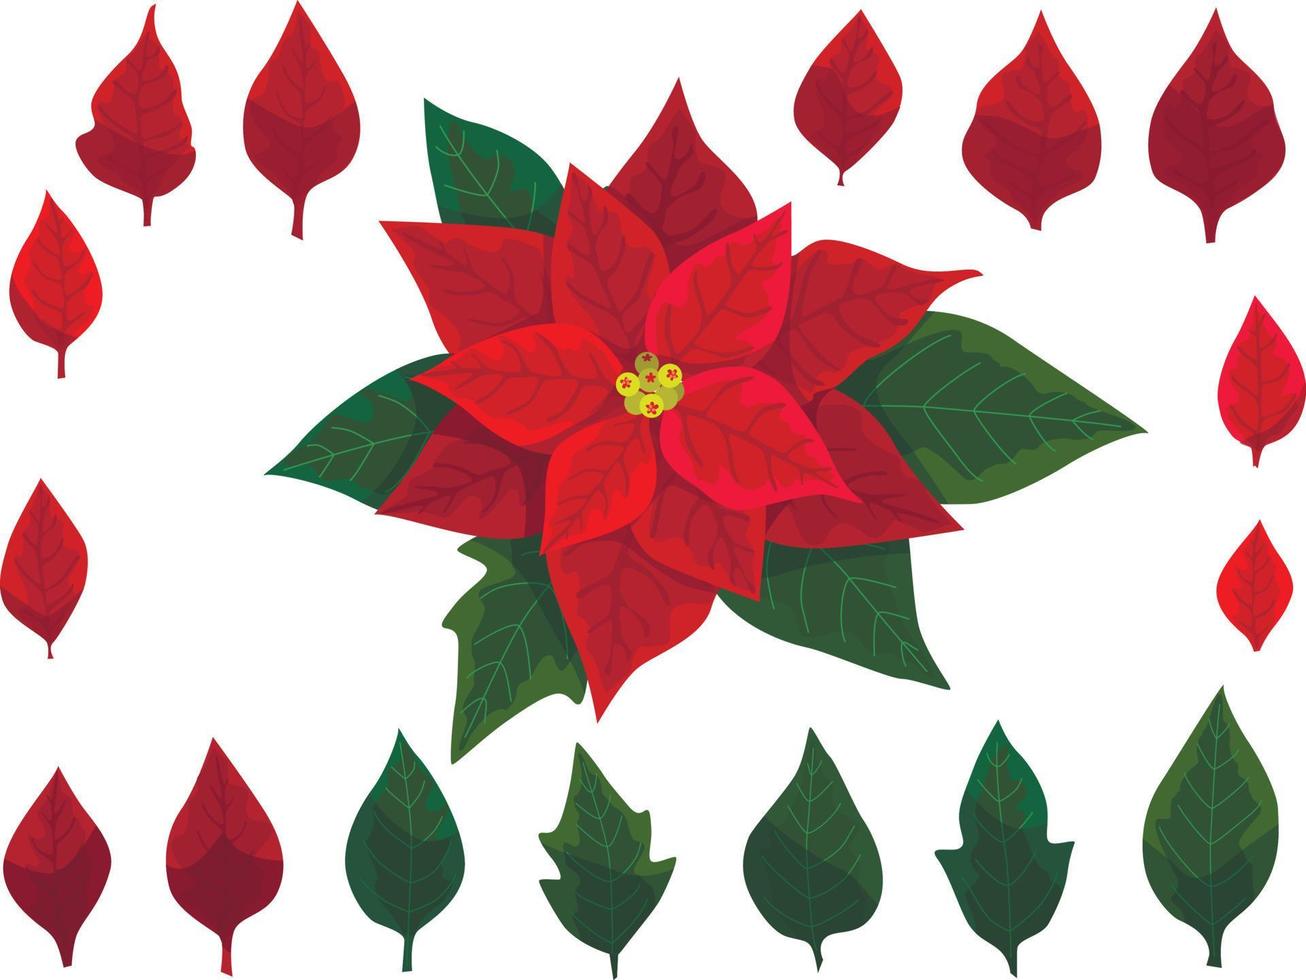 Poinsettia flower with leaves for Christmas or New Year greeting card design. vector